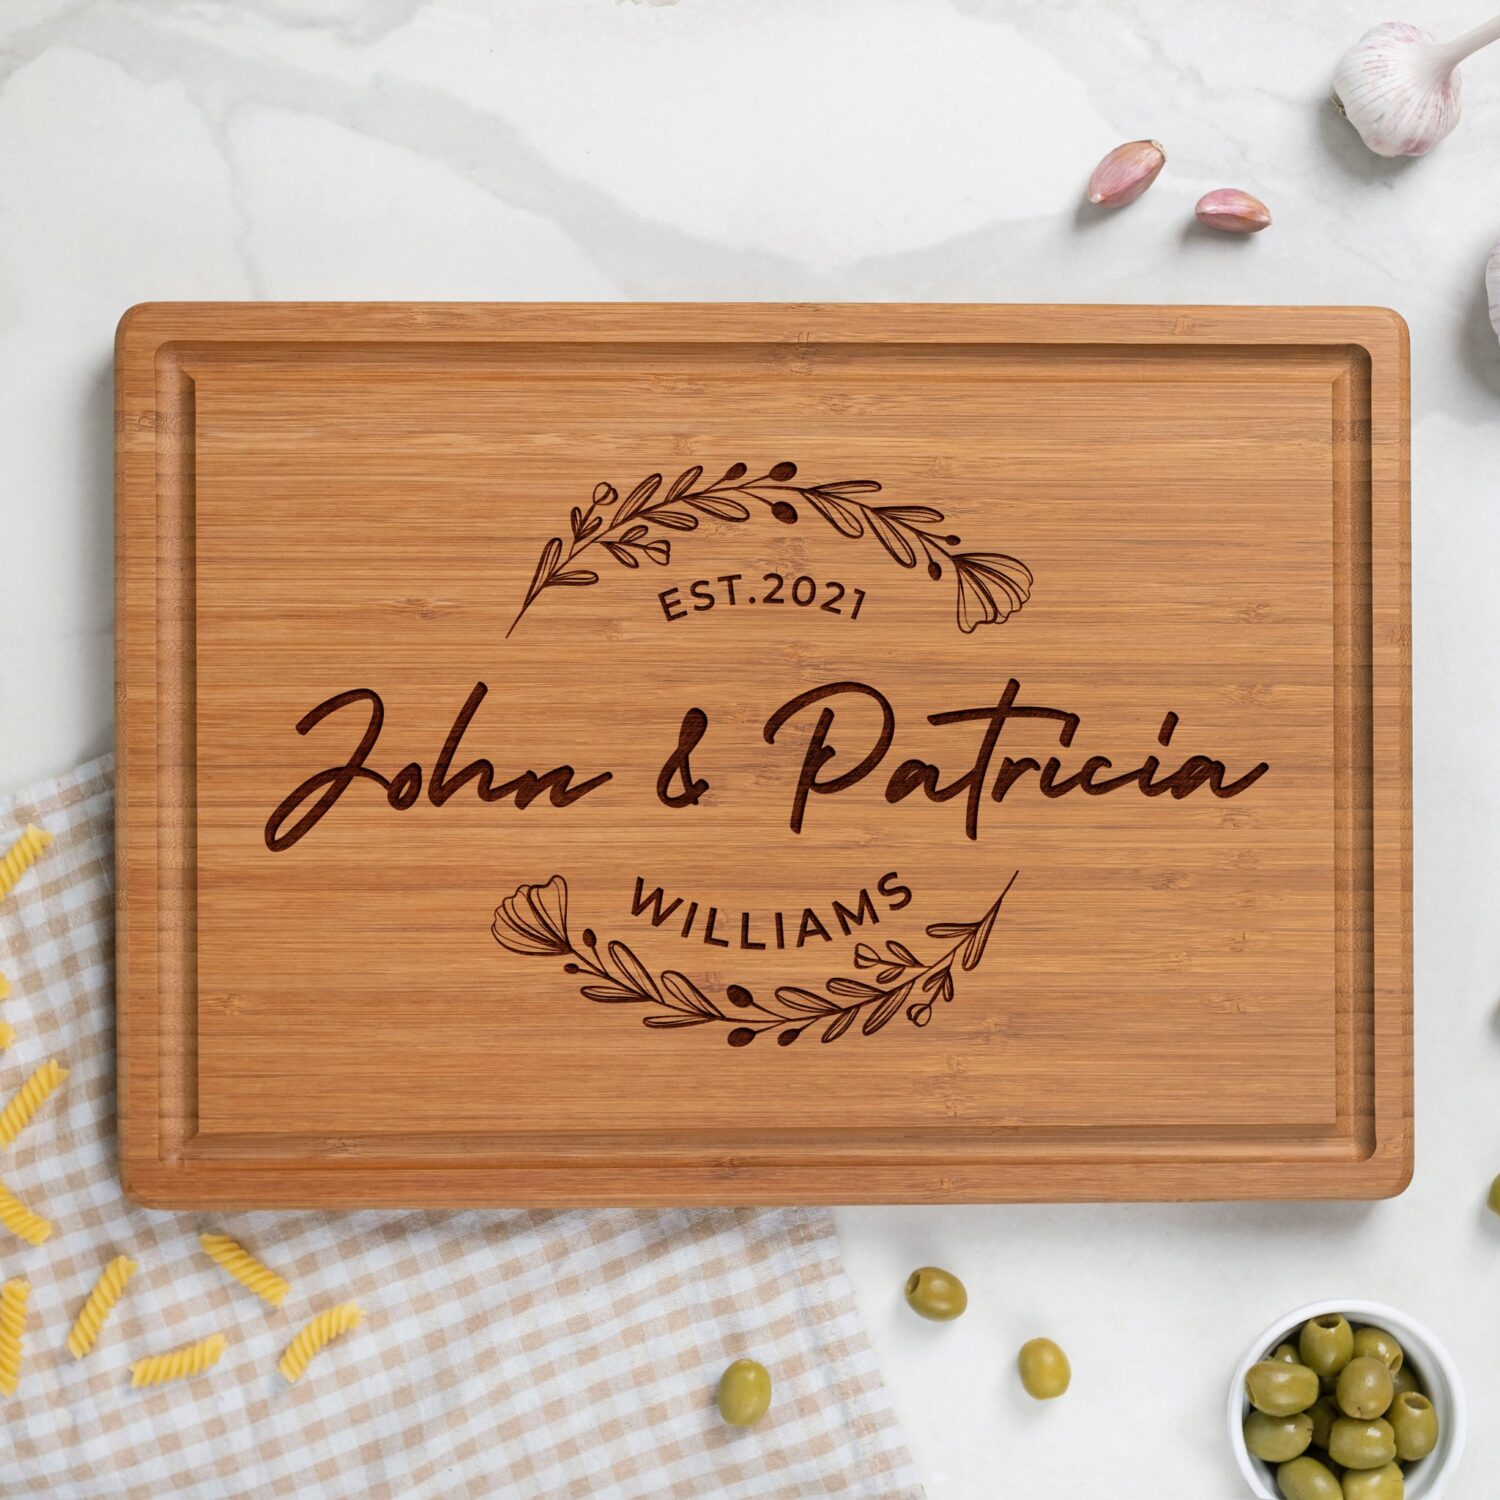 Personalized Bamboo Board for couples